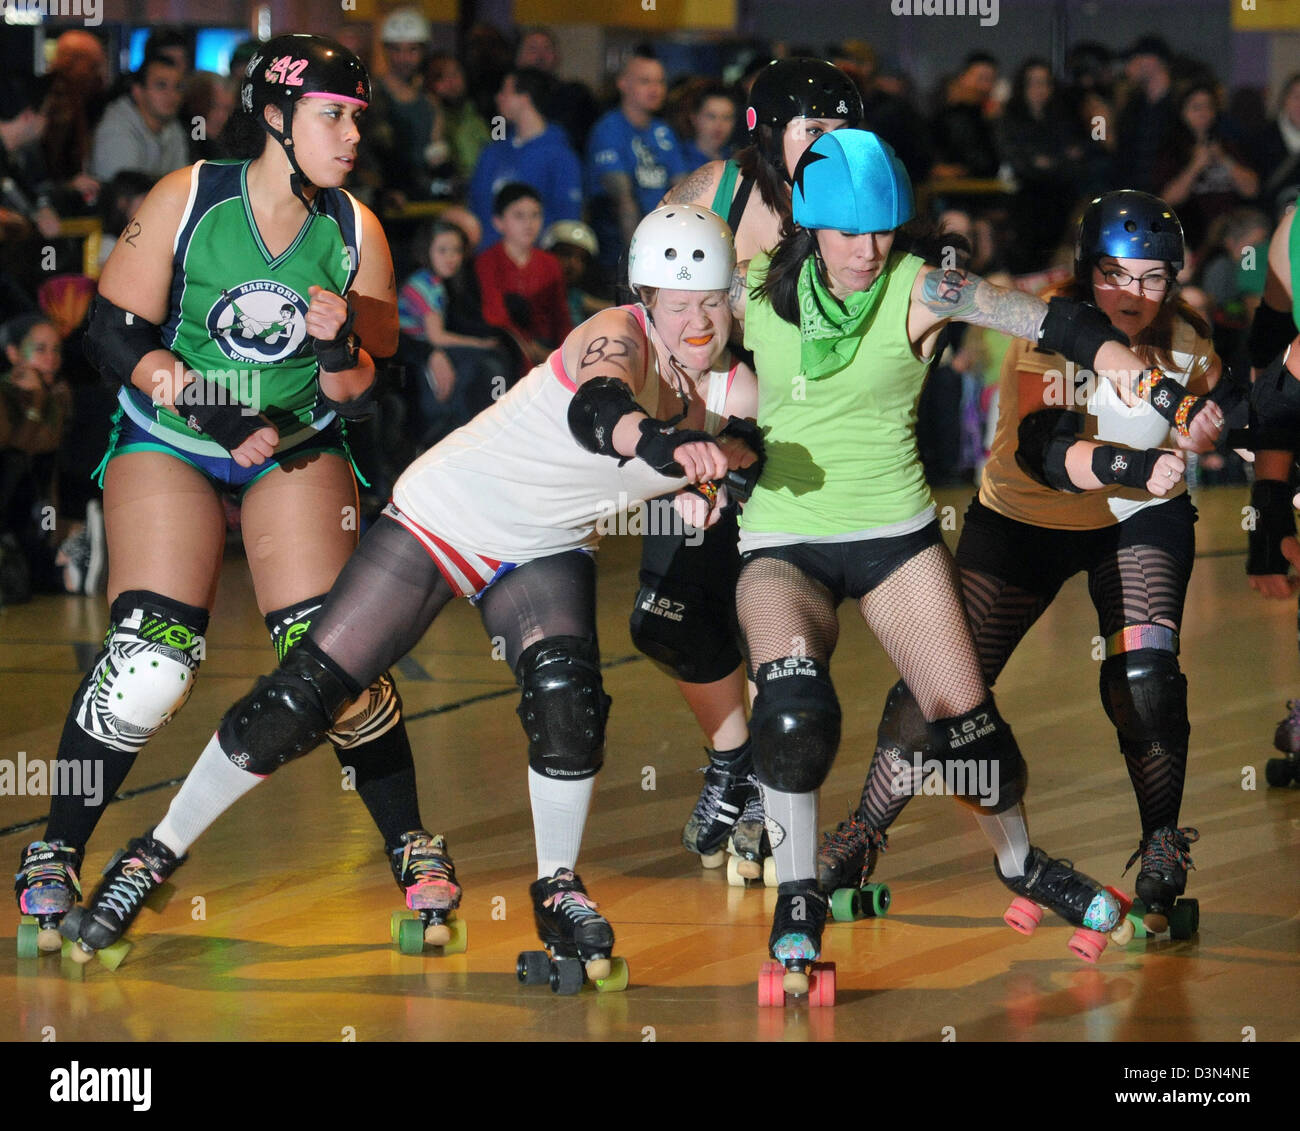 Amateur Roller Derby in Groton CT USA Stockfotografie - Alamy